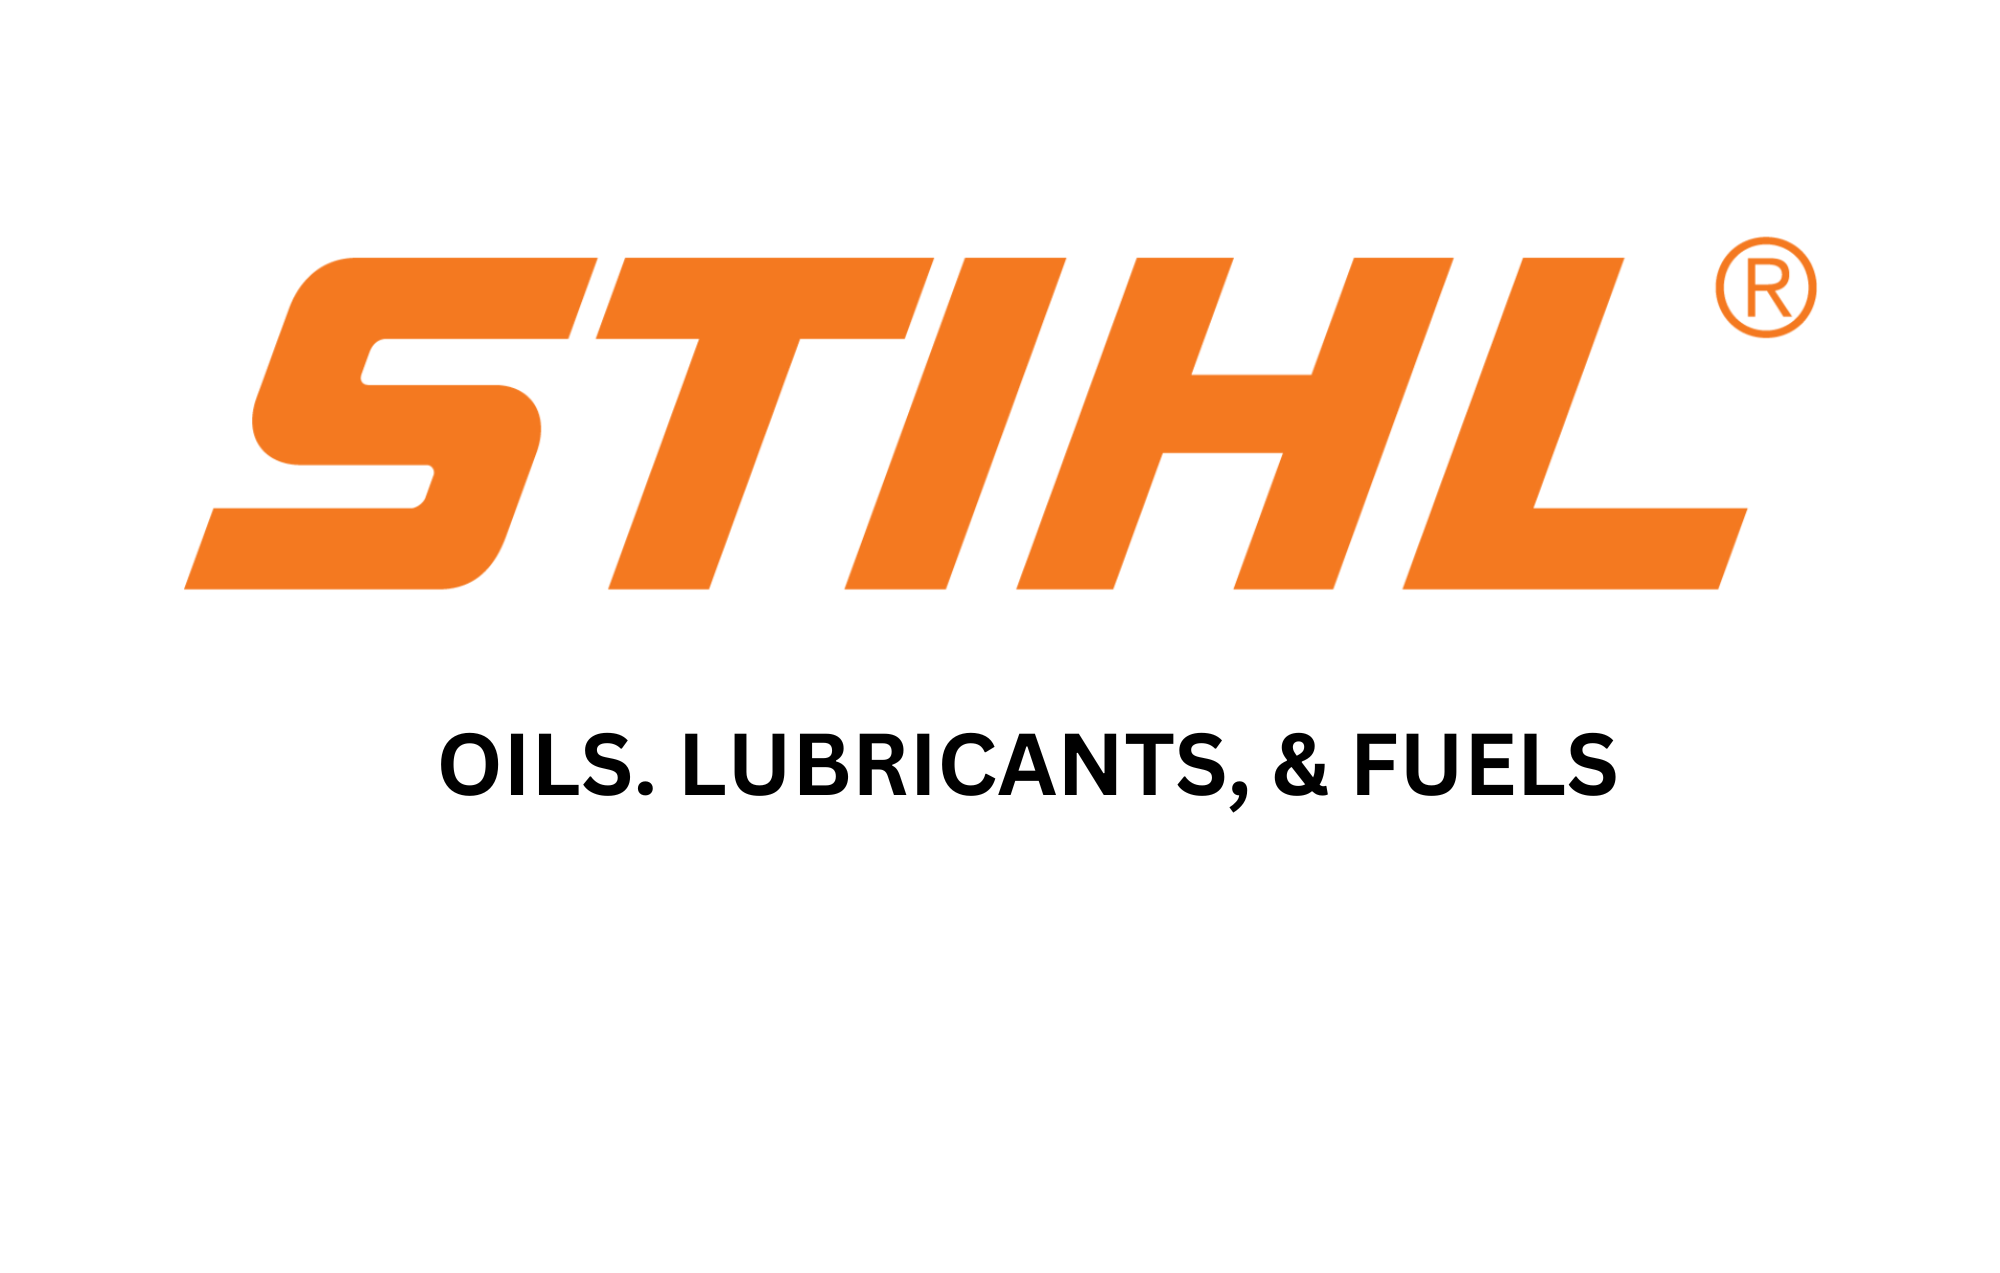 Oils. Lubricants, & Fuels